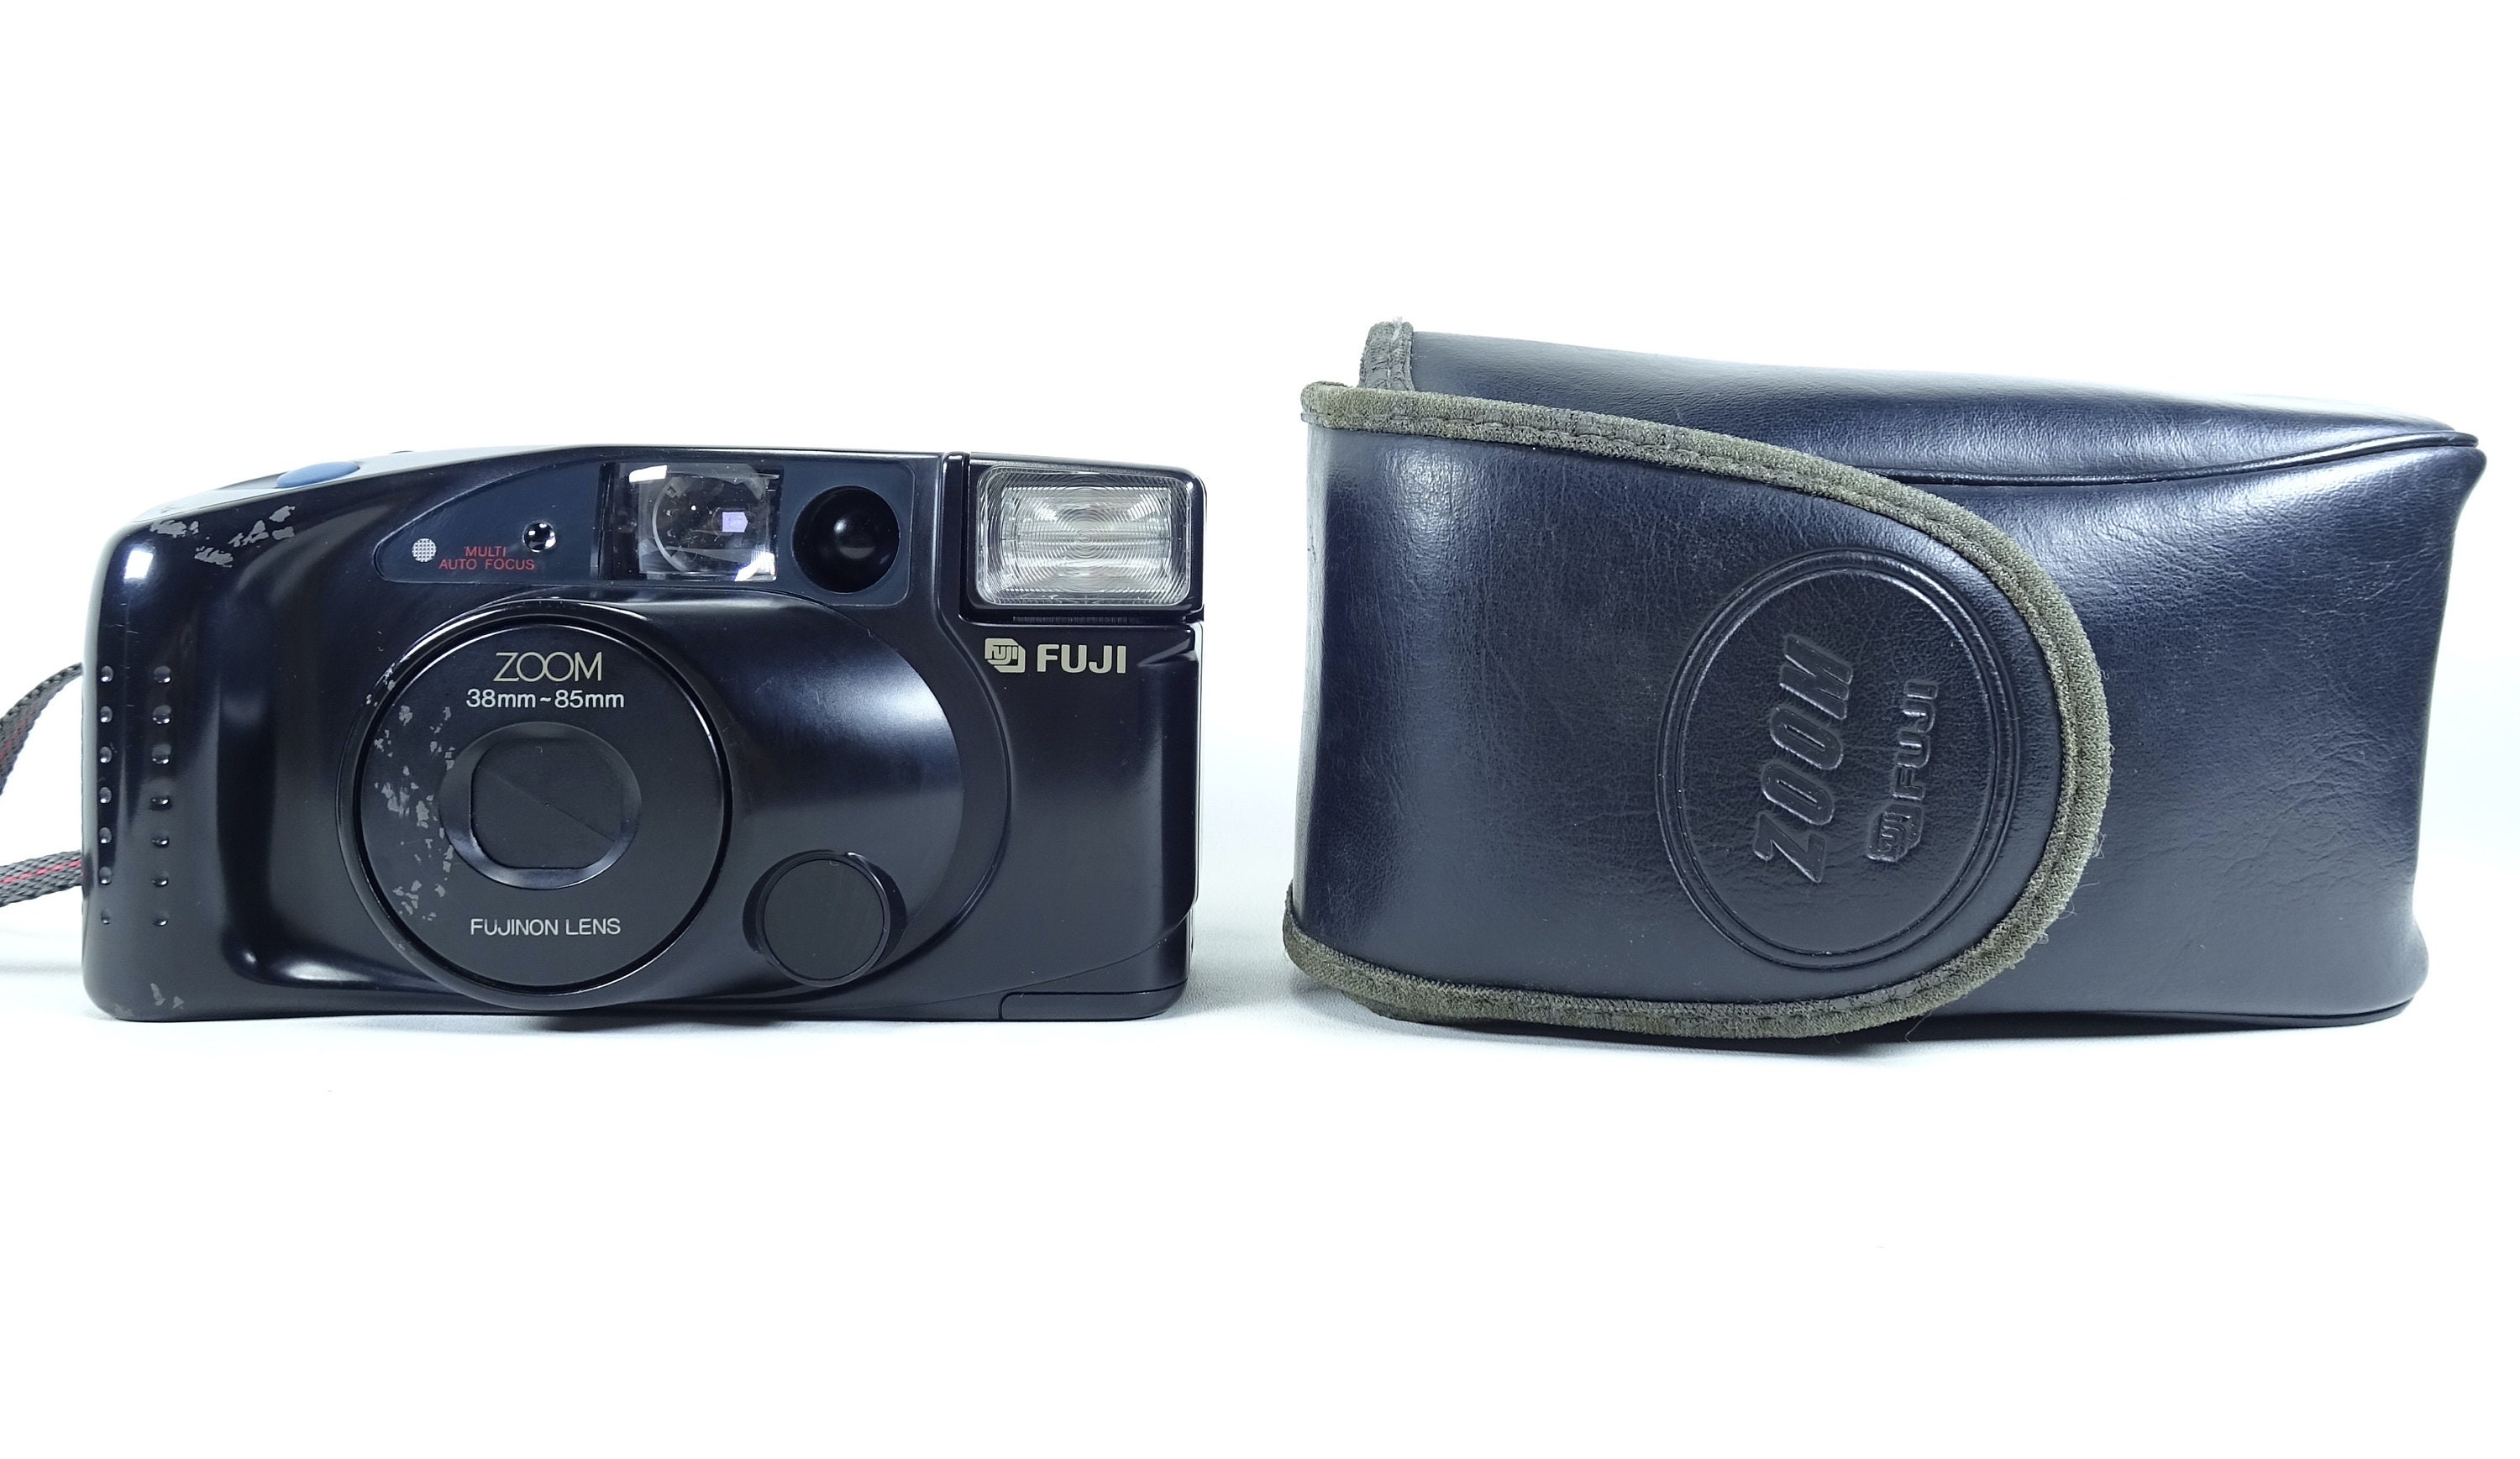 Fuji Zoom Cardia 900 Date Point & Shoot Film Vintage Camera With Case In  Good Condition.